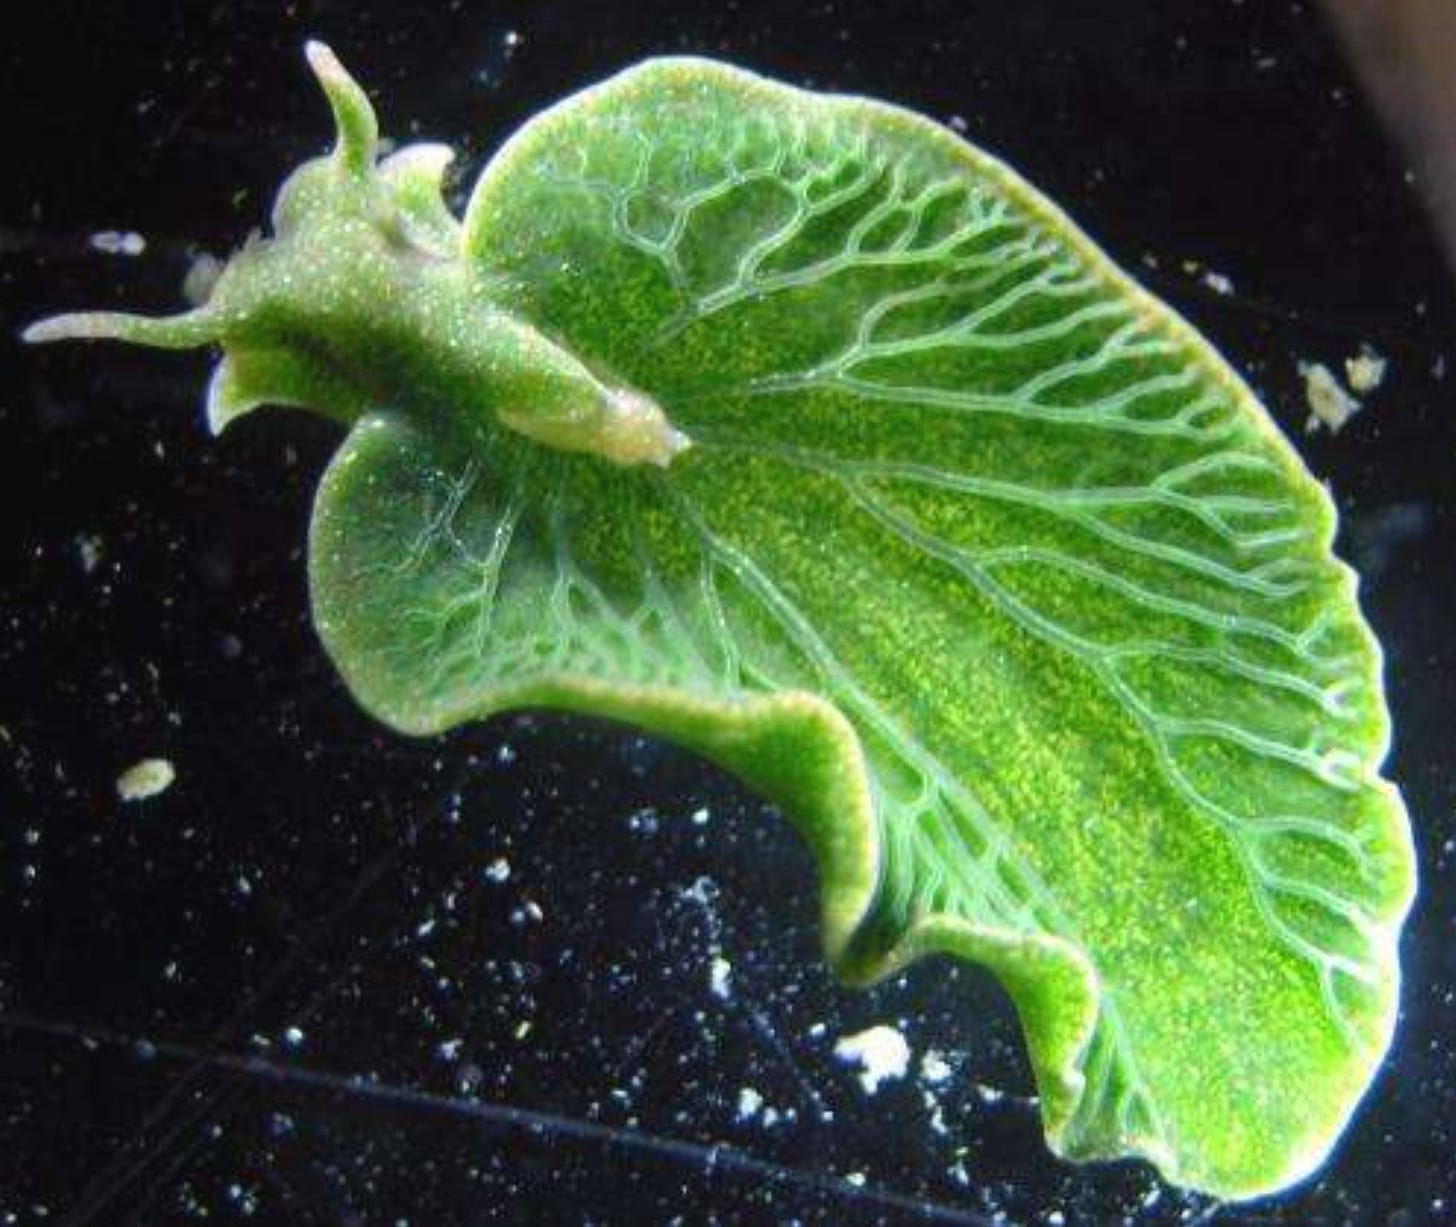 The image is an emerald green sea slug. It is bright green and looks like a leaf with veins and horns.